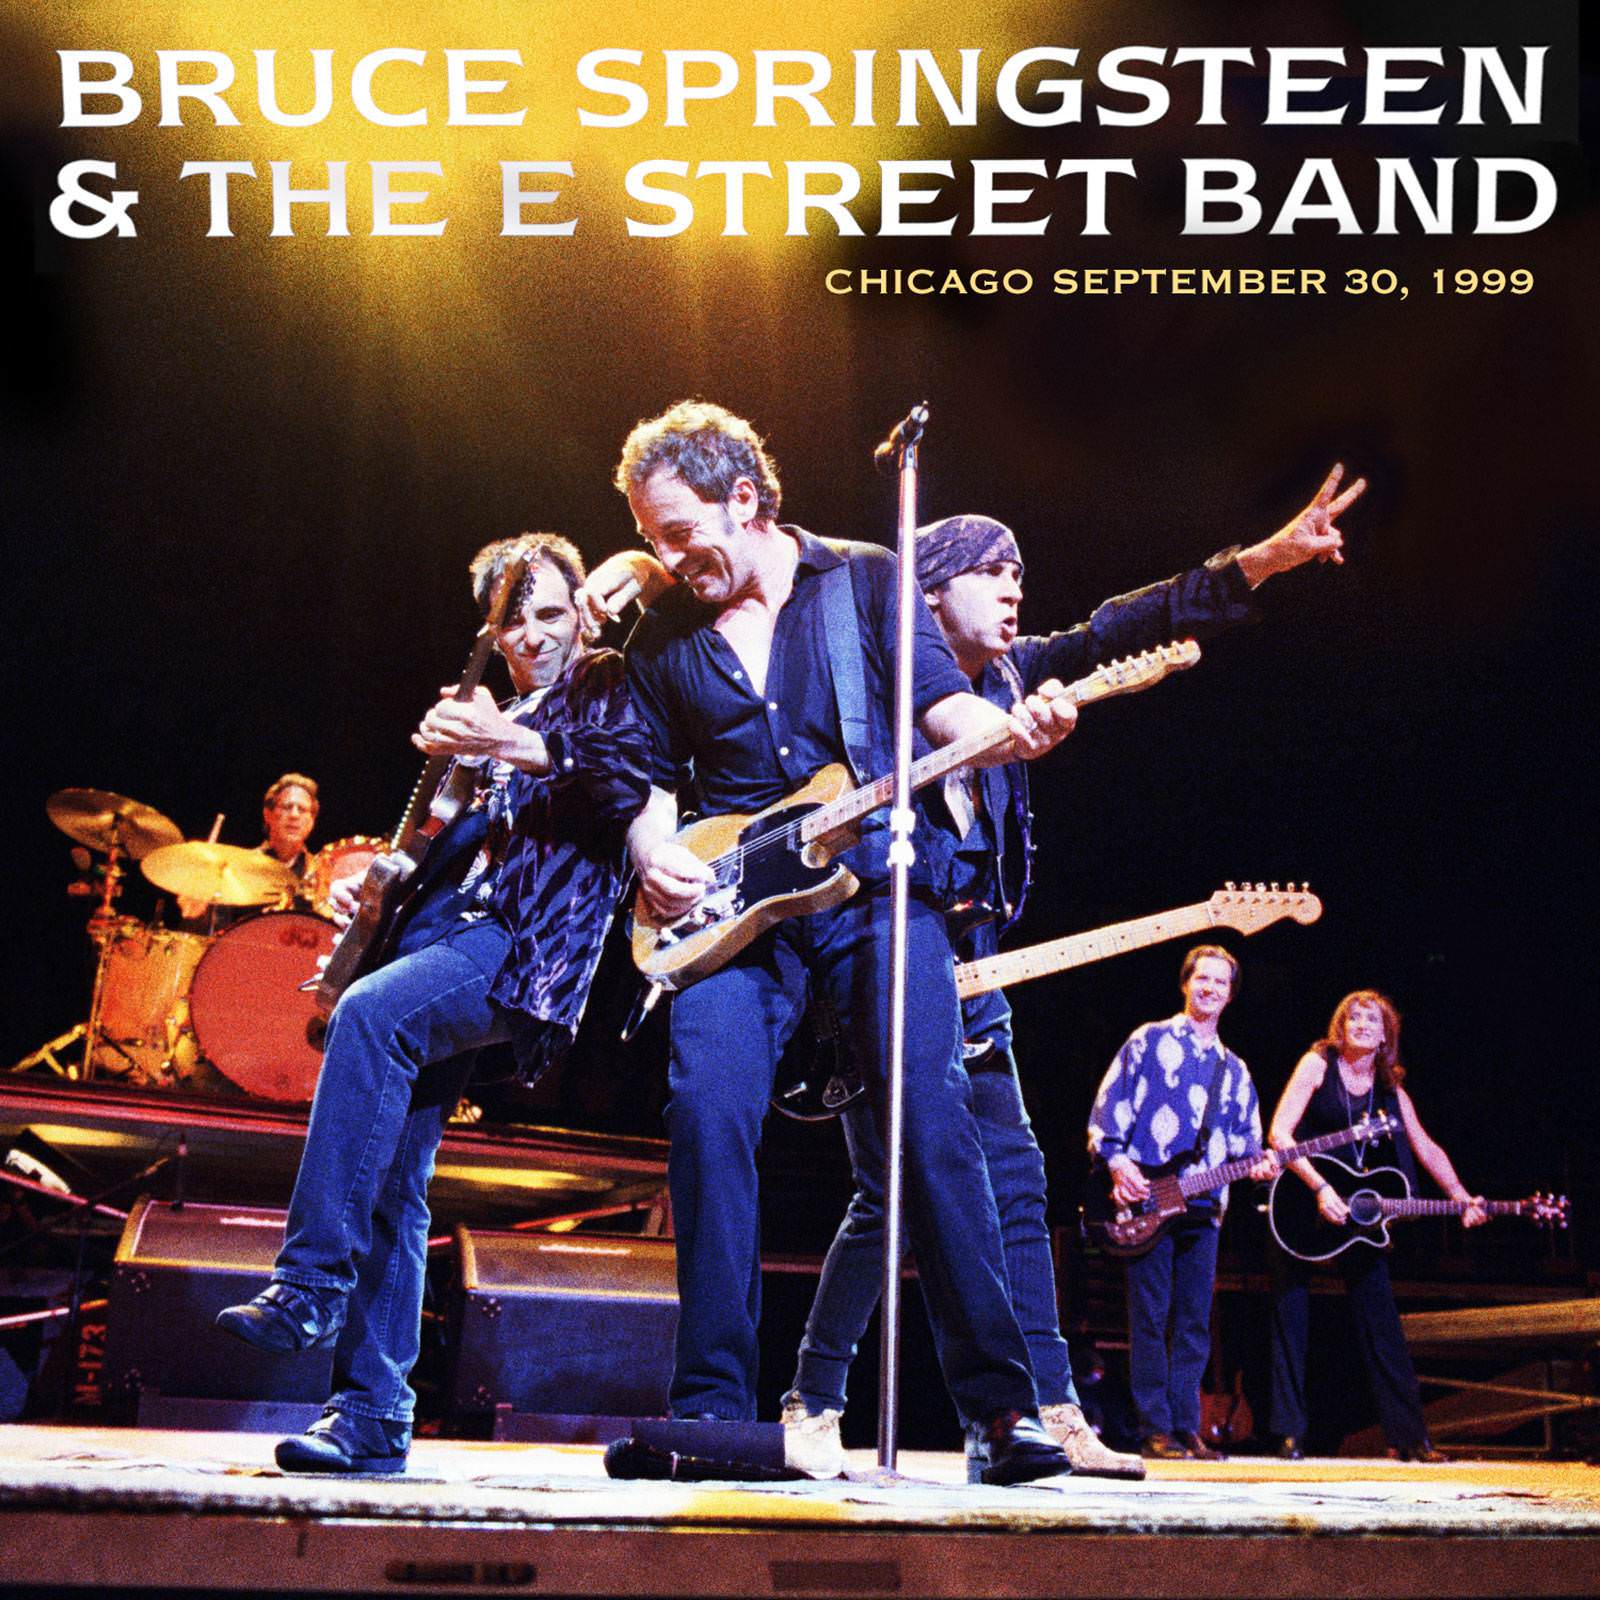 Bruce Springsteen & The E Street Band – 1999-09-30 United Center, Chicago, IL (2018) [FLAC 24bit/44,1kHz]